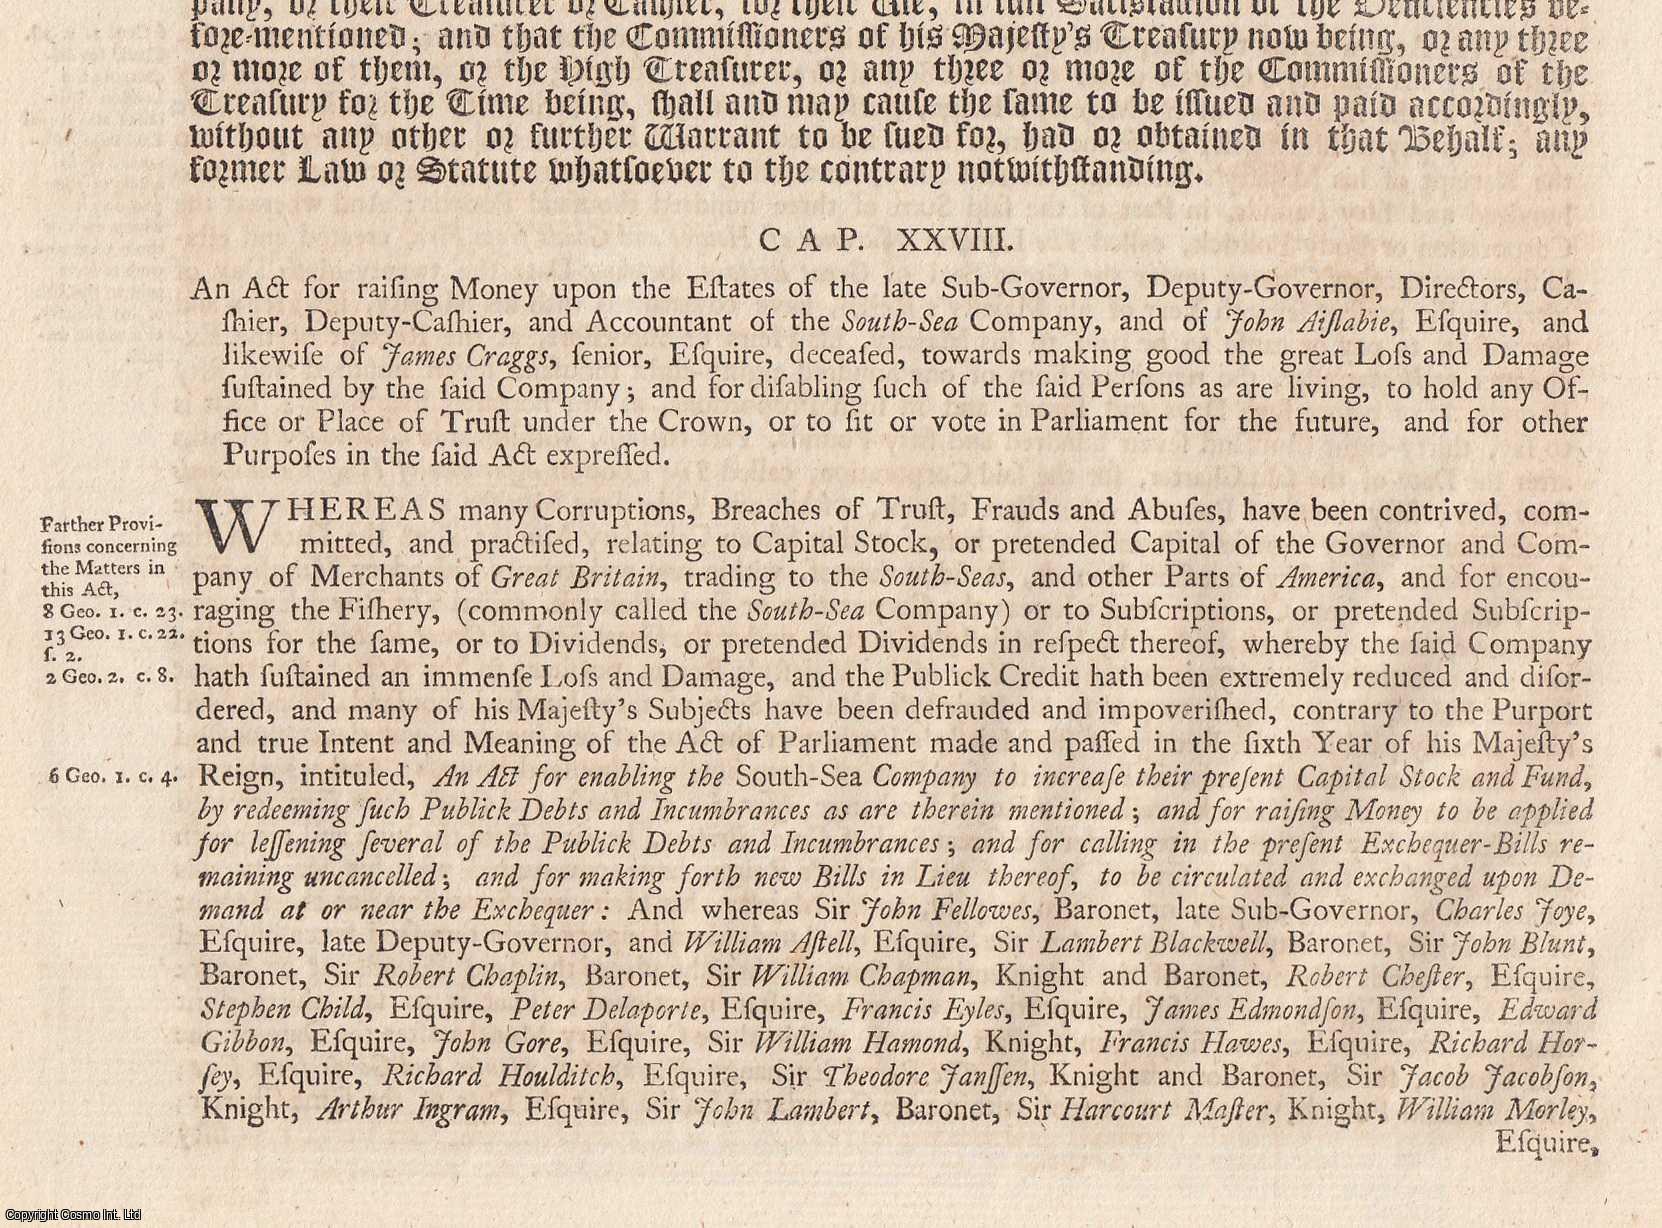 King George I - South Sea Bubble : South Sea Company Act 1720 c. 28. An Act for Raising Money upon The Estates of The Late Sub-Governor, Deputy Governor, Directors, Cashier, Deputy Cashier and Accountant of The South Sea Company.